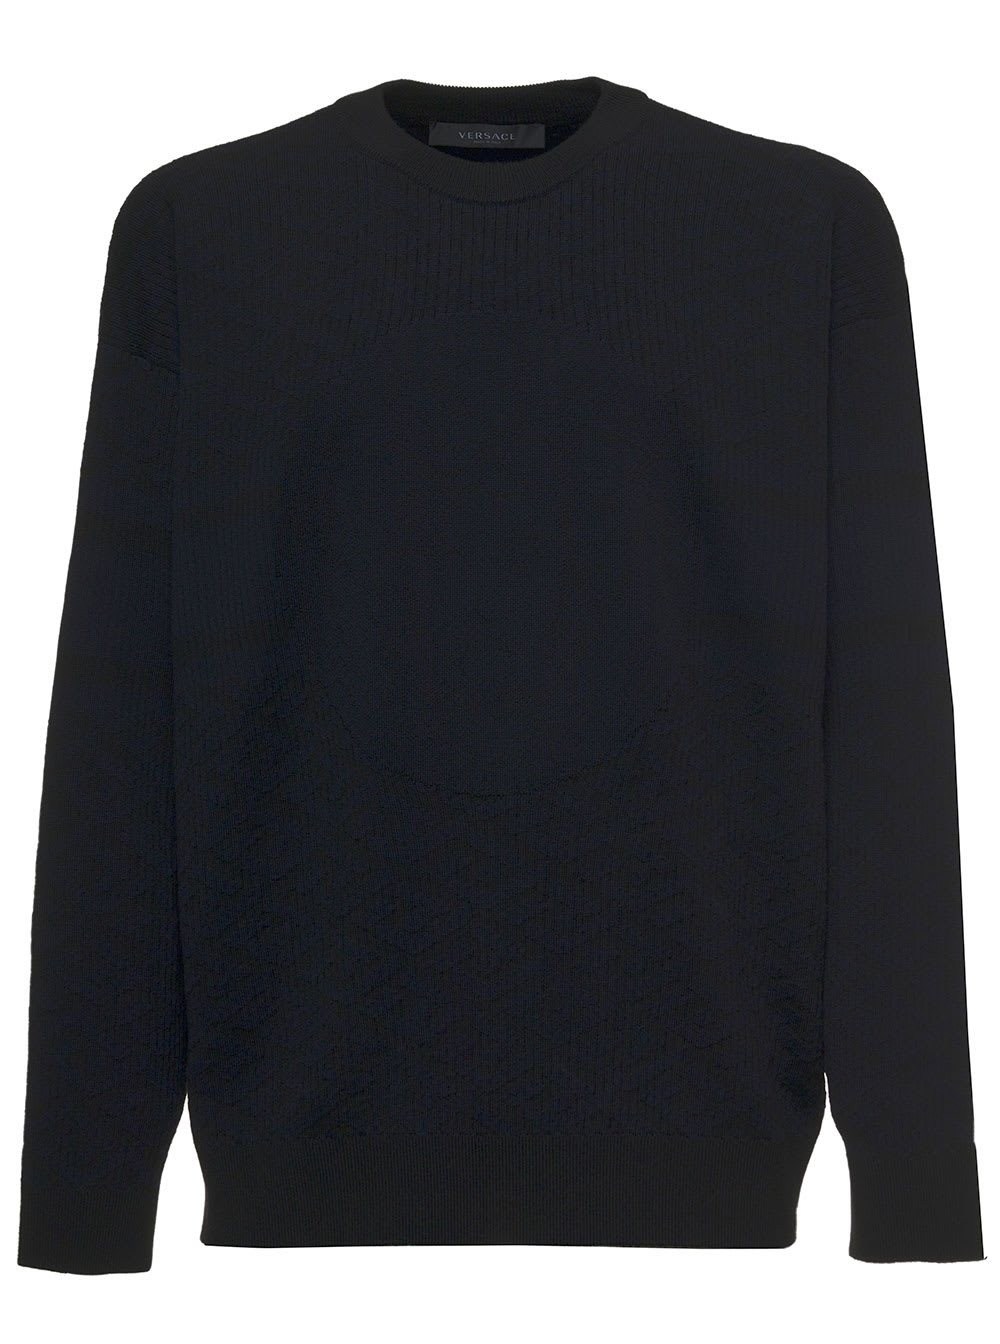 Versace Black Wool Blend Sweater With Logo